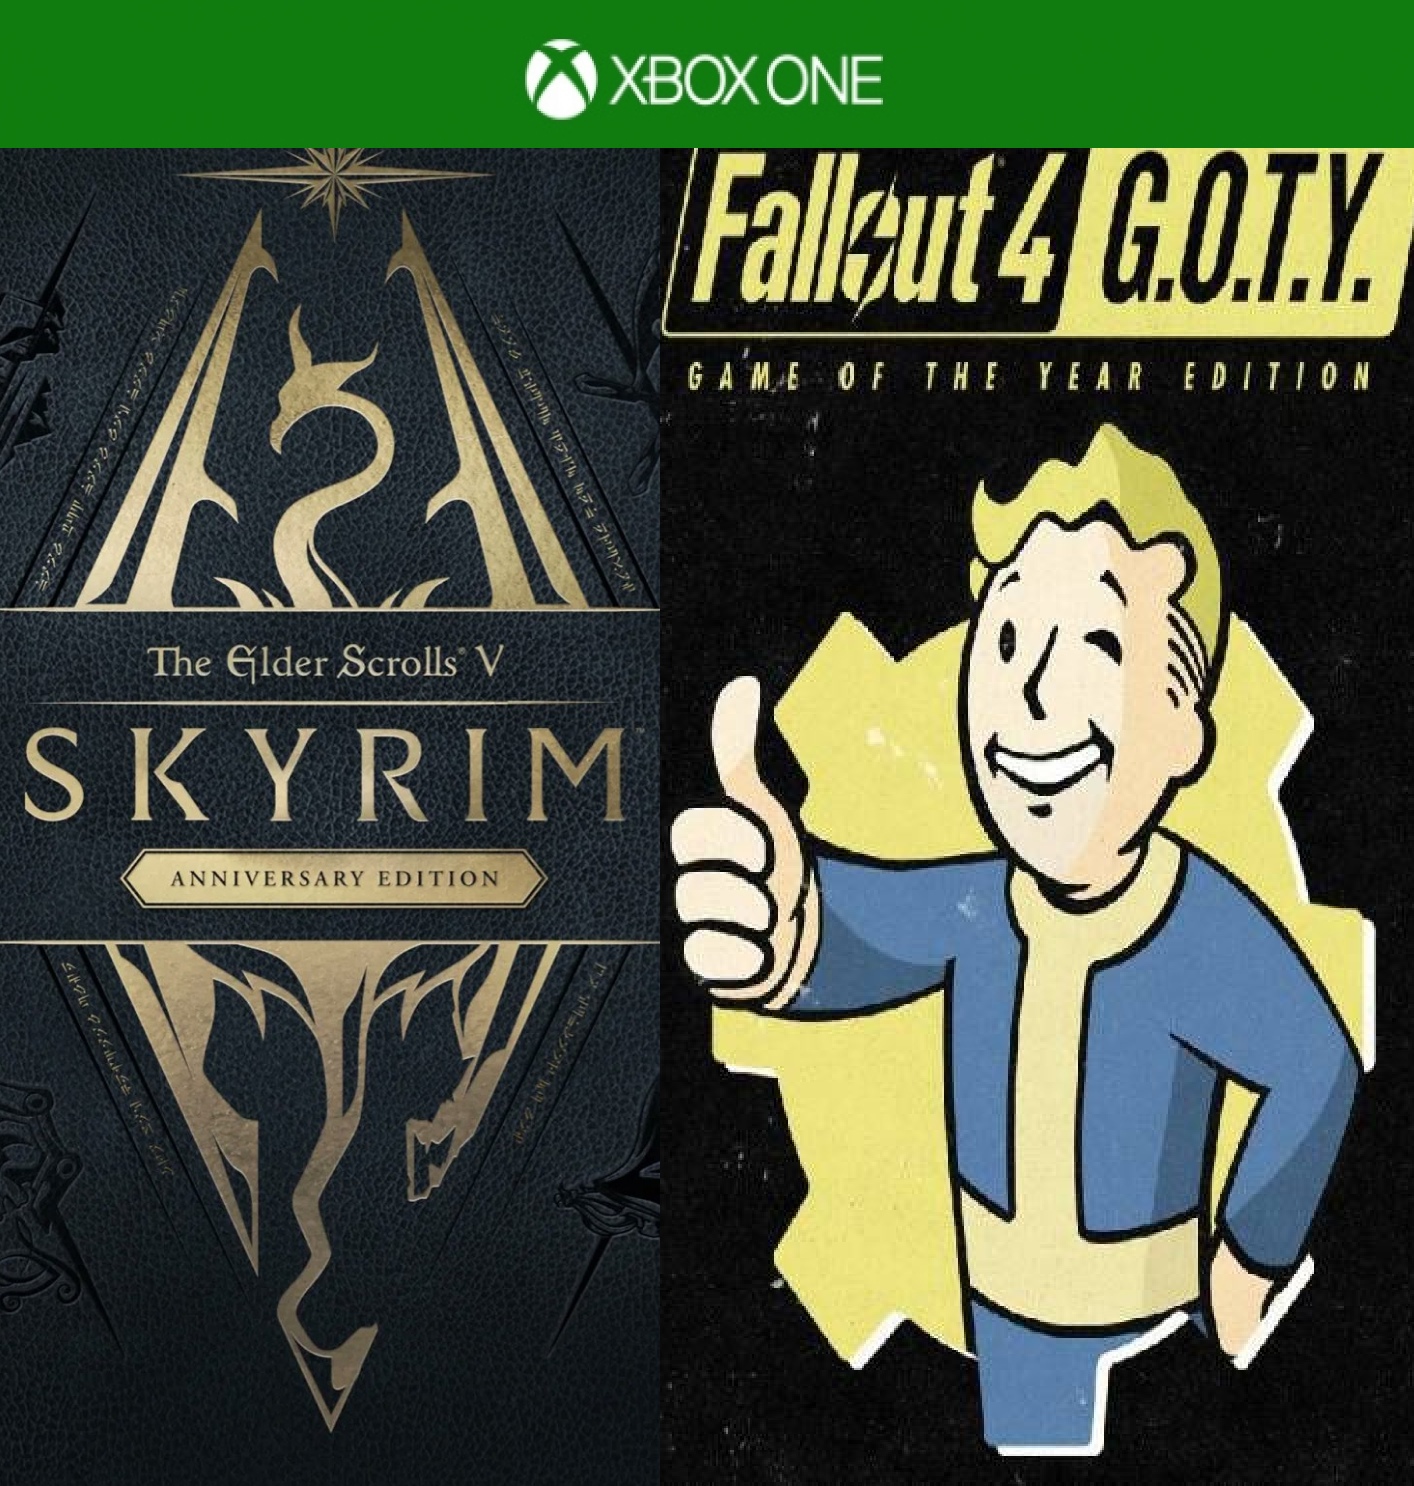 Will there be a special edition fallout 4 фото 5